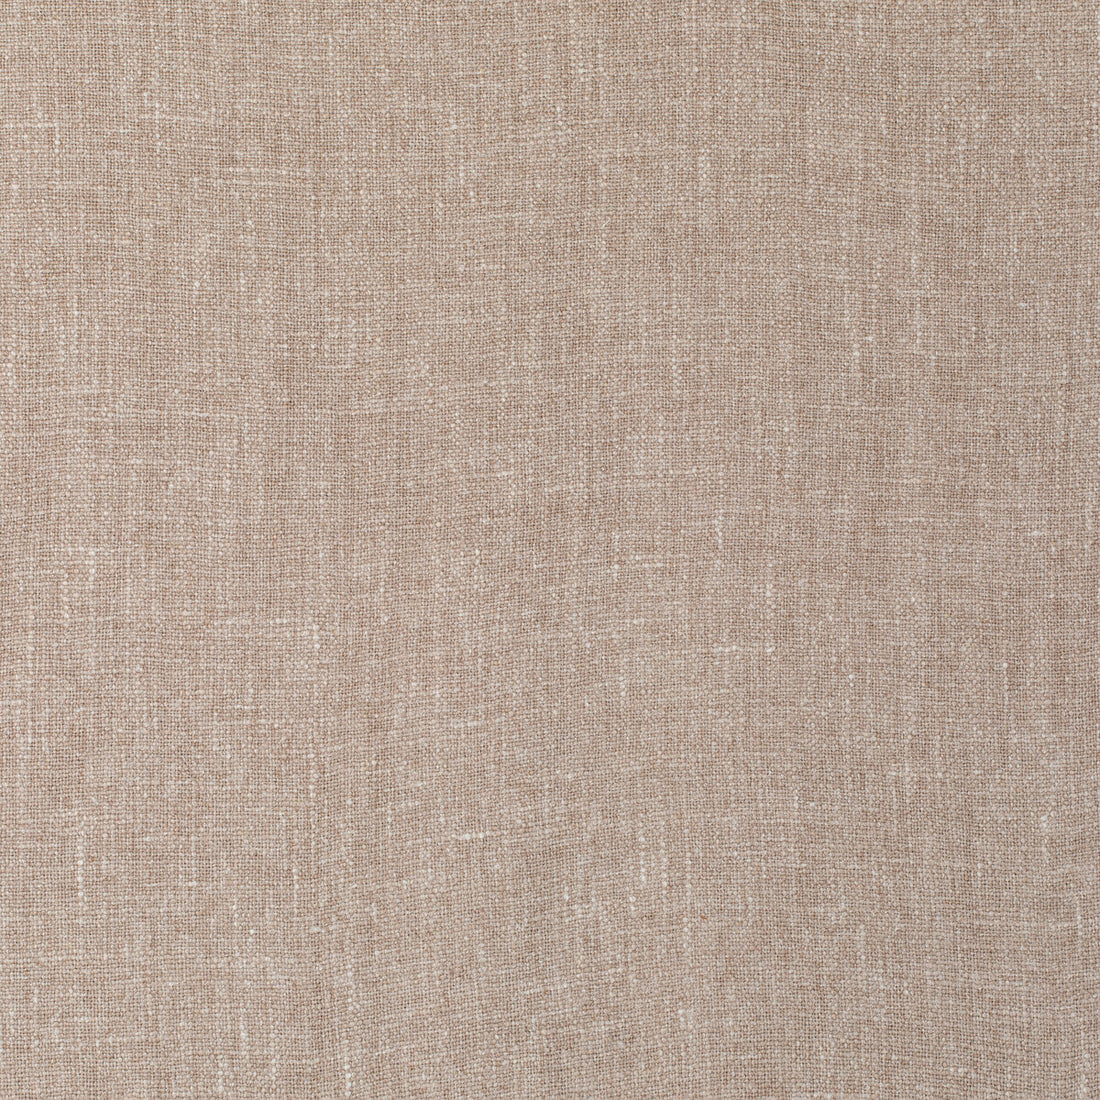 Kepala fabric in blush color - pattern 35889.17.0 - by Kravet Couture in the Linherr Hollingsworth Boheme II collection